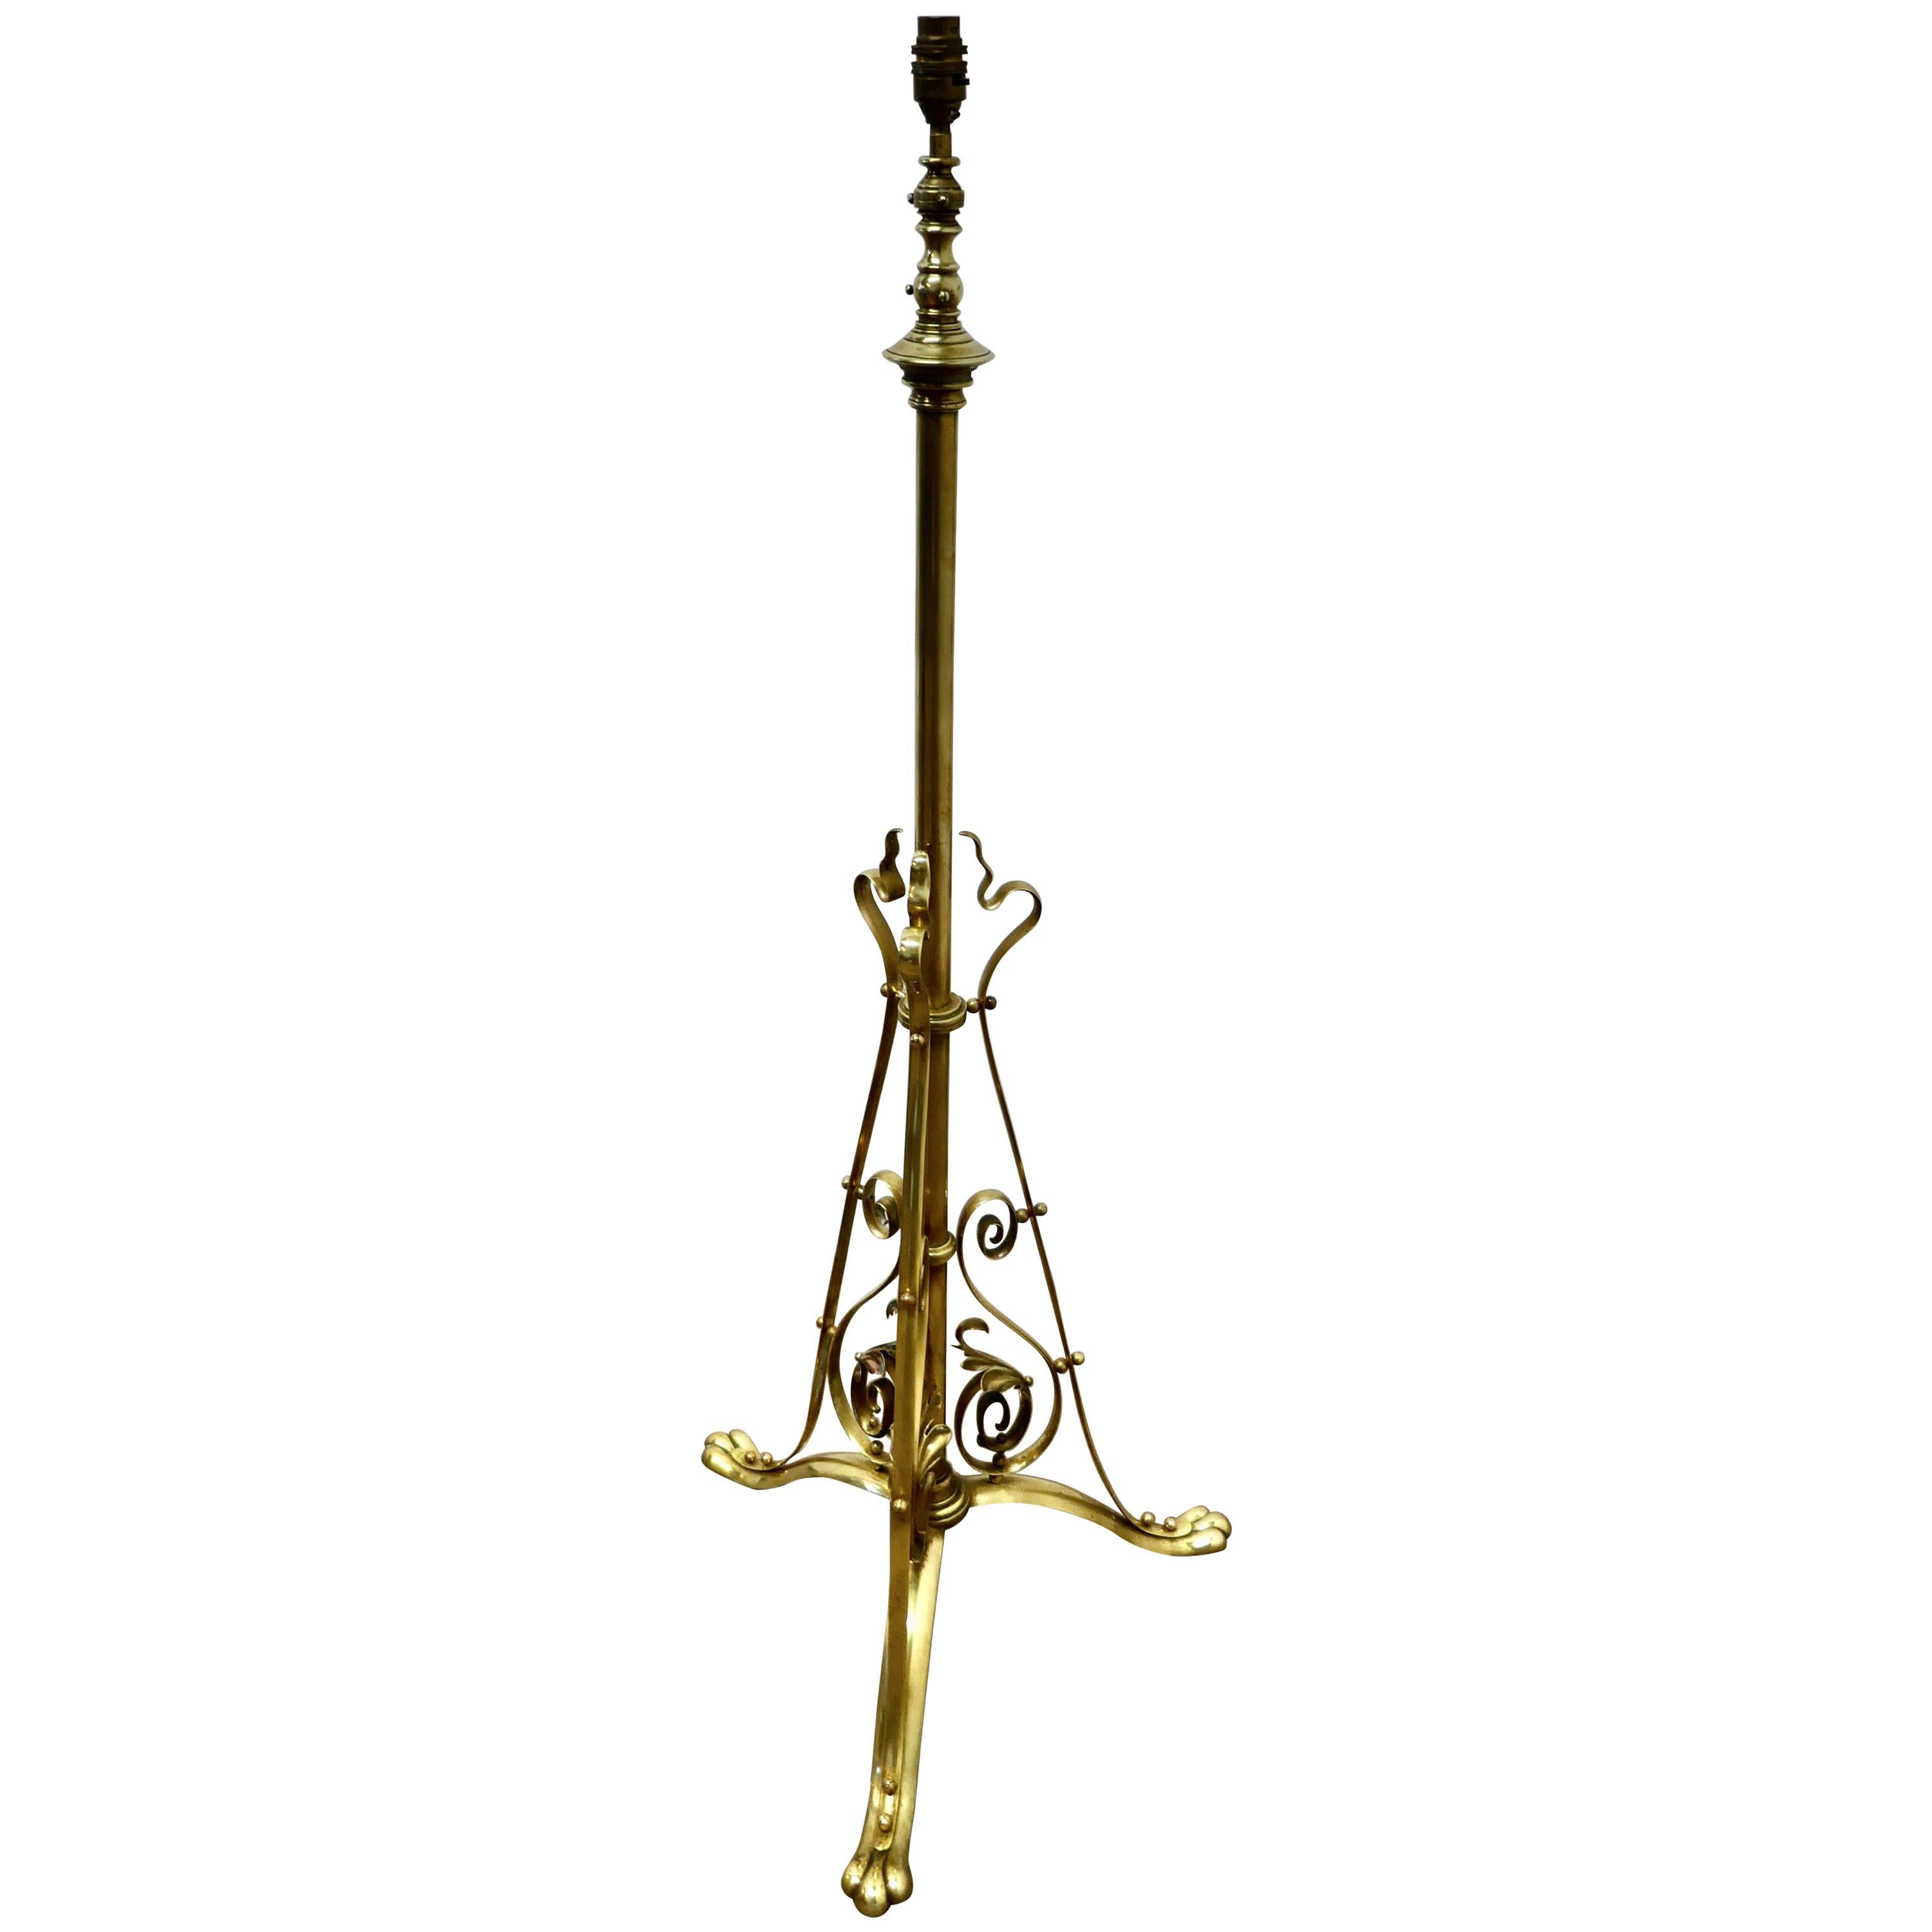 Adjustable Brass Floor Lamp in the Arts & Crafts Style